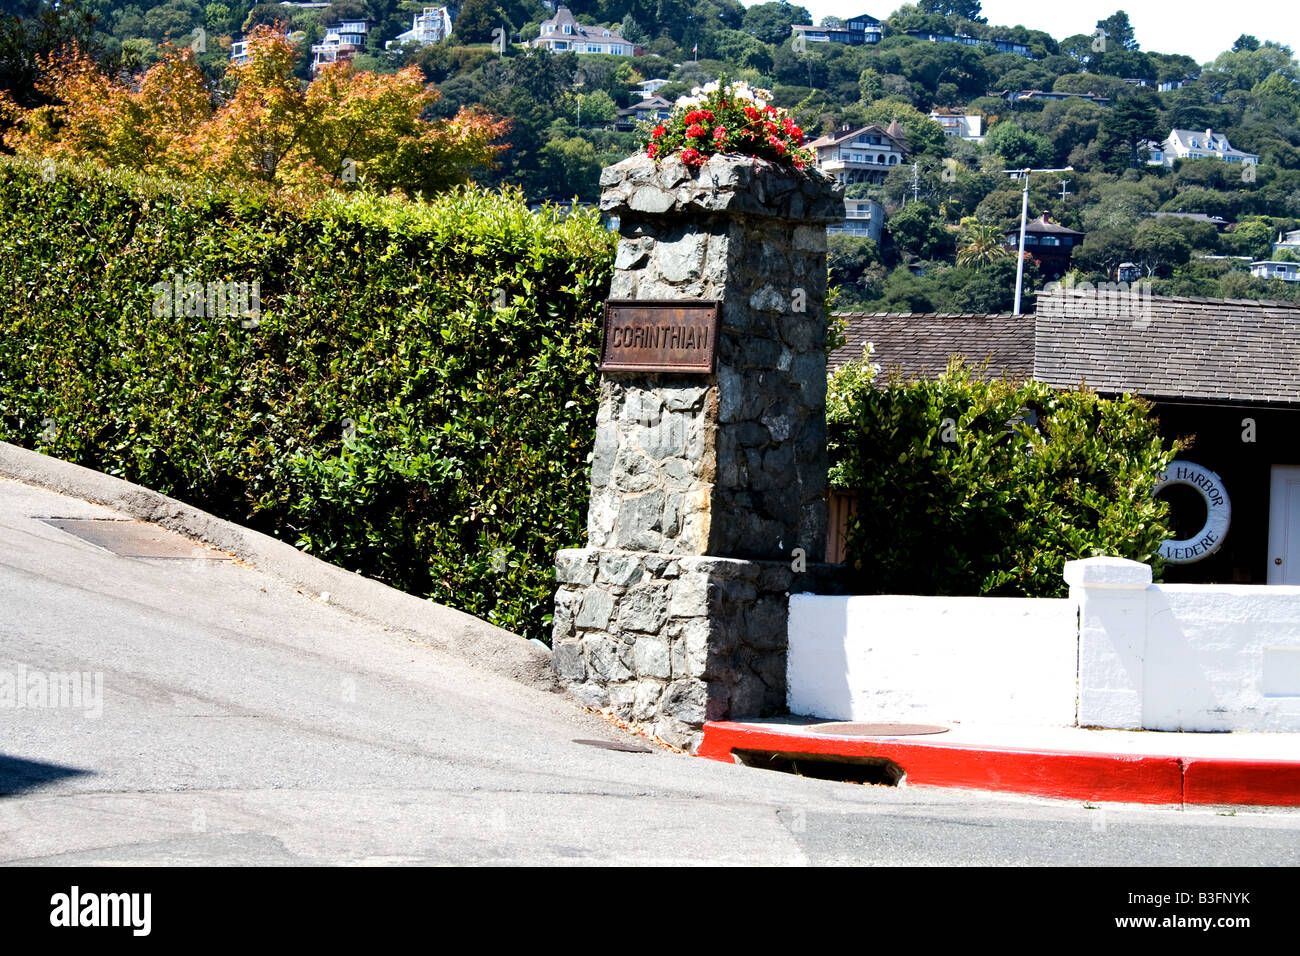 Stone pillar with flowers on top with the word 'Corinthian' on a metal plaque in Tiburon, California Stock Photo